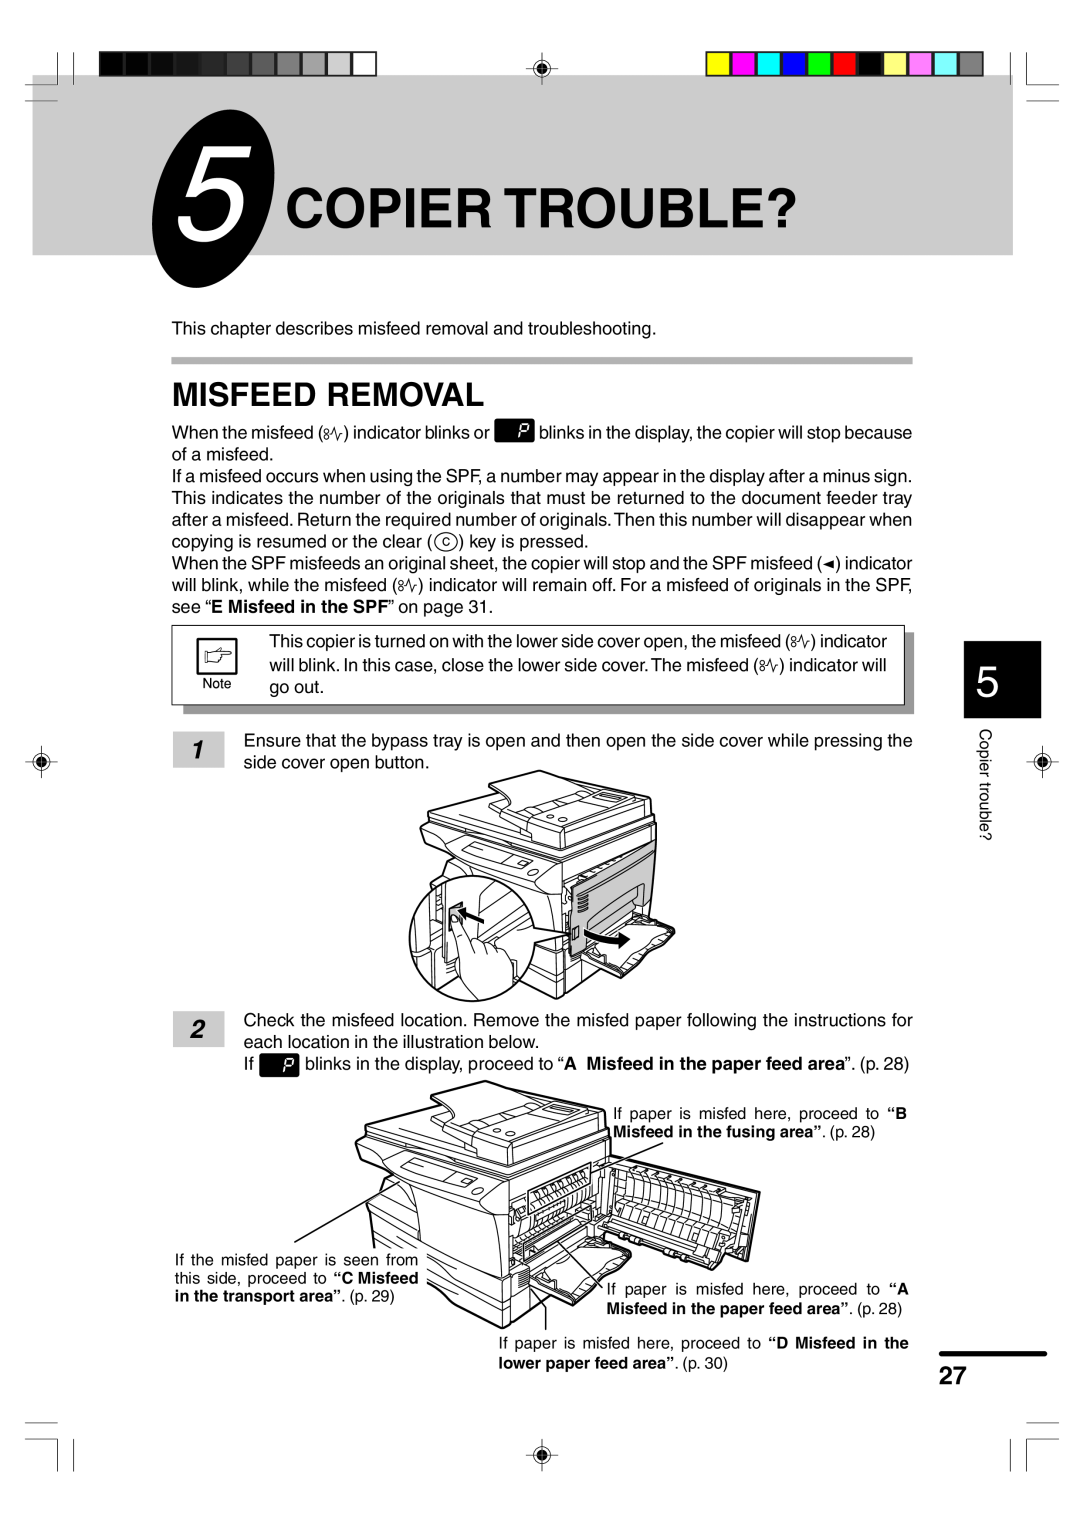 Sharp AR-F152 operation manual Copier Trouble?, Misfeed Removal 